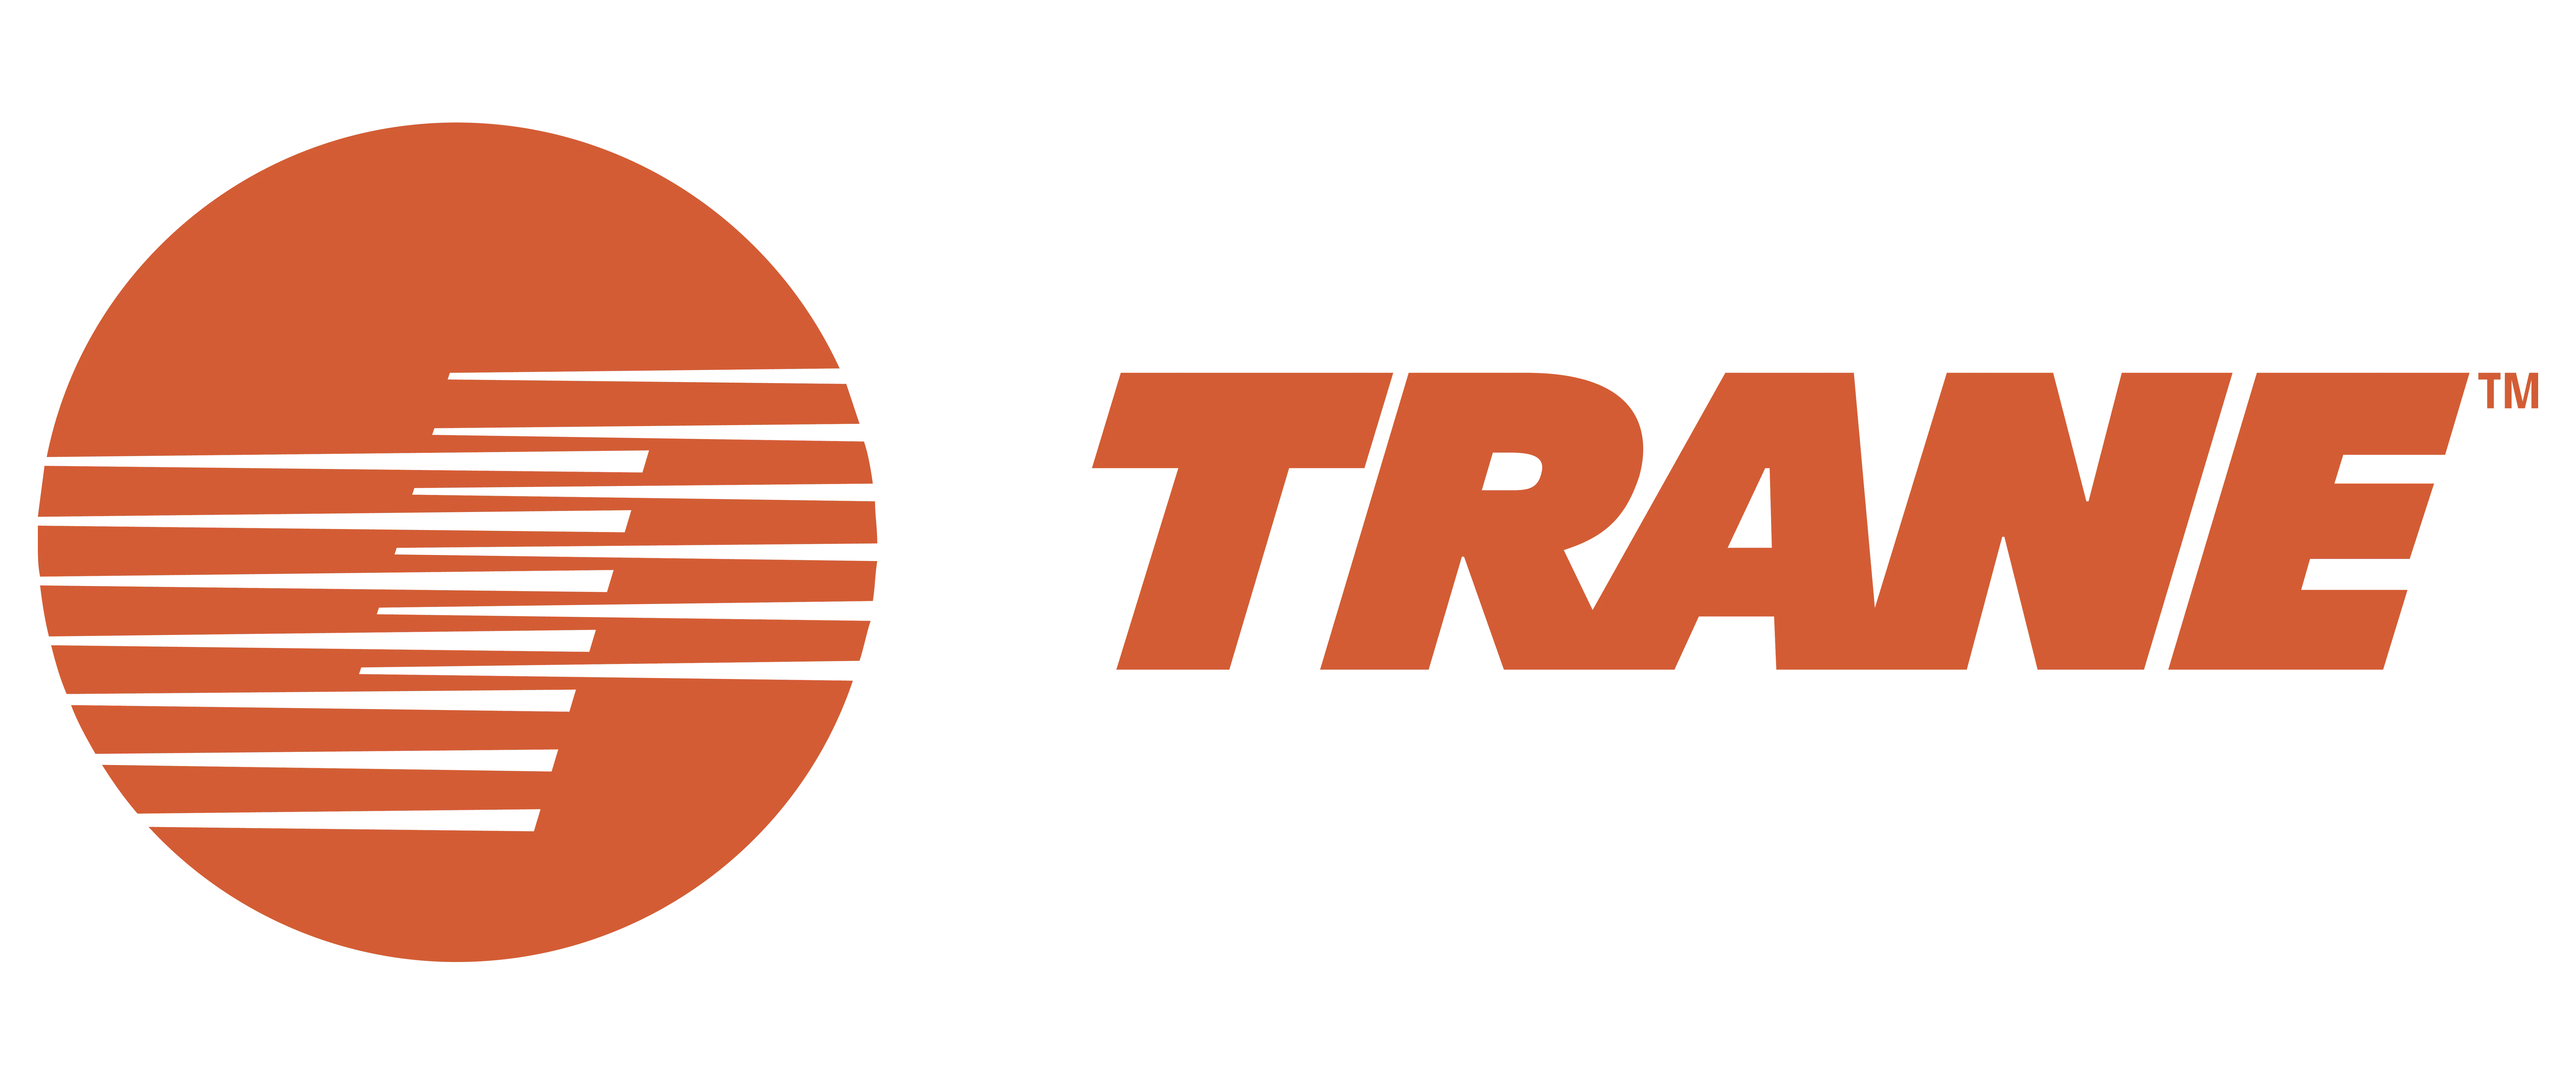 Trane AC service in Grosse Pointe MI is our speciality.